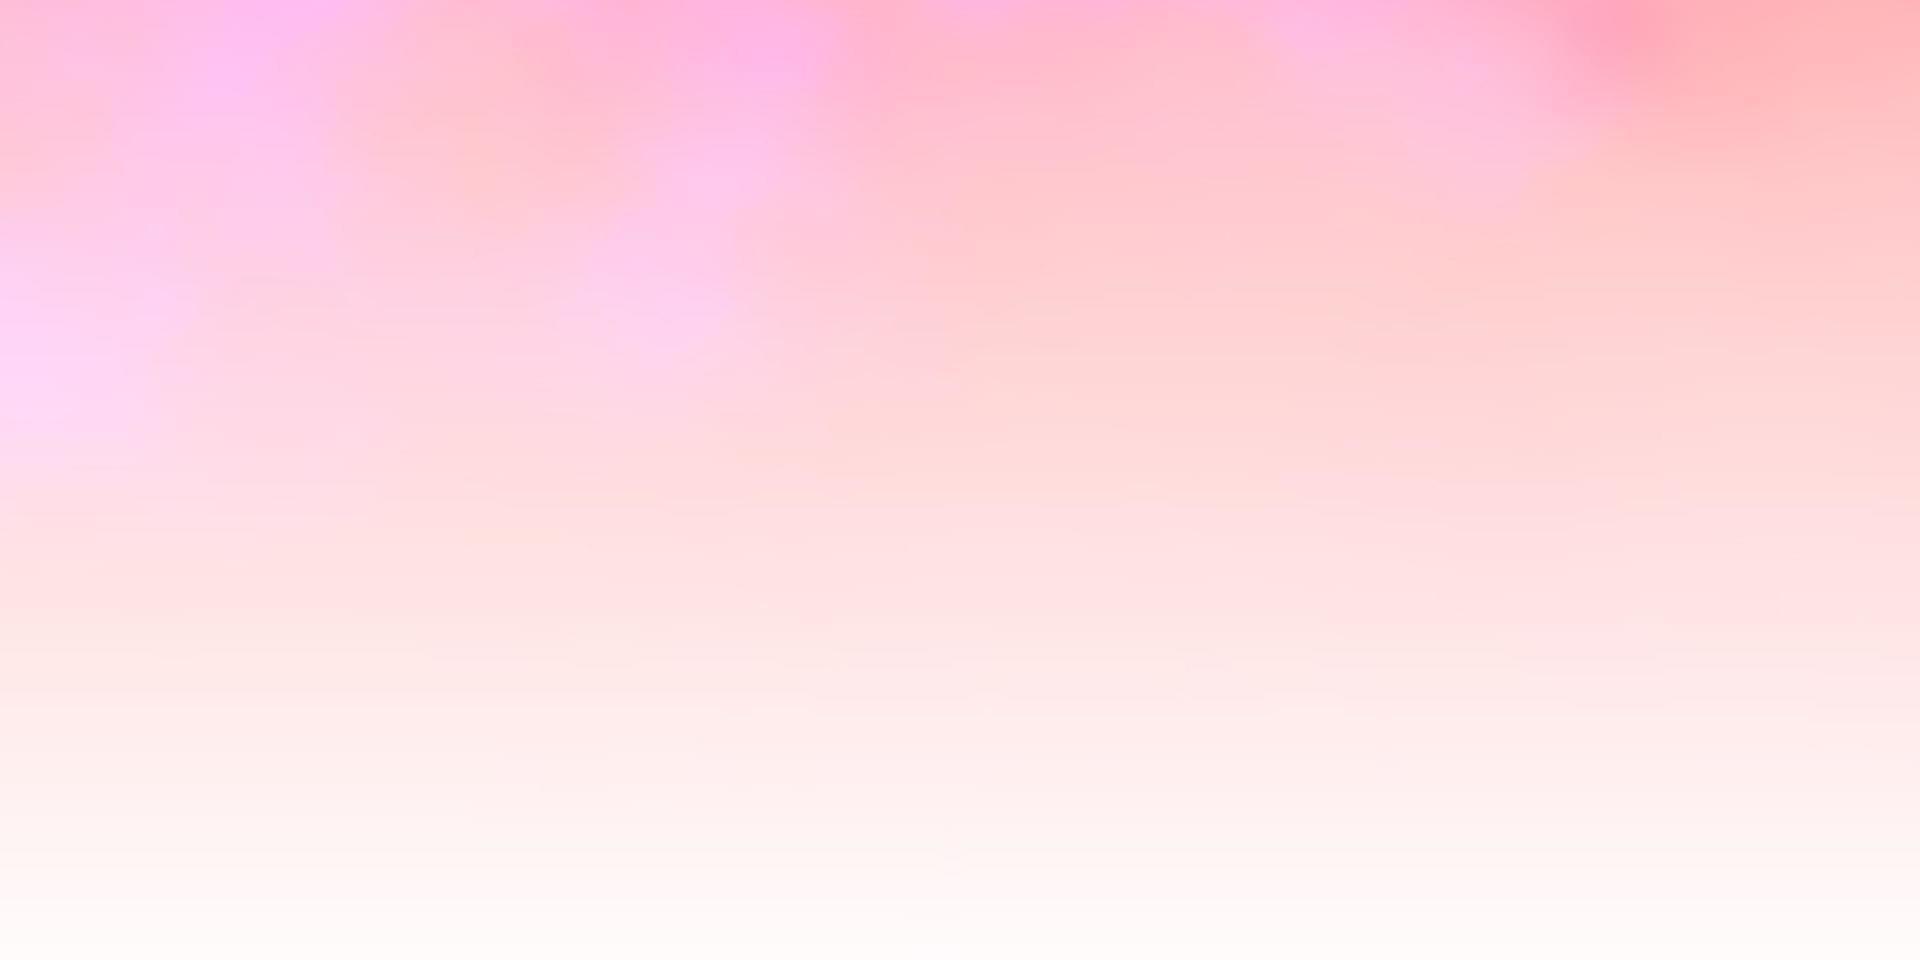 Light Pink vector background with clouds.